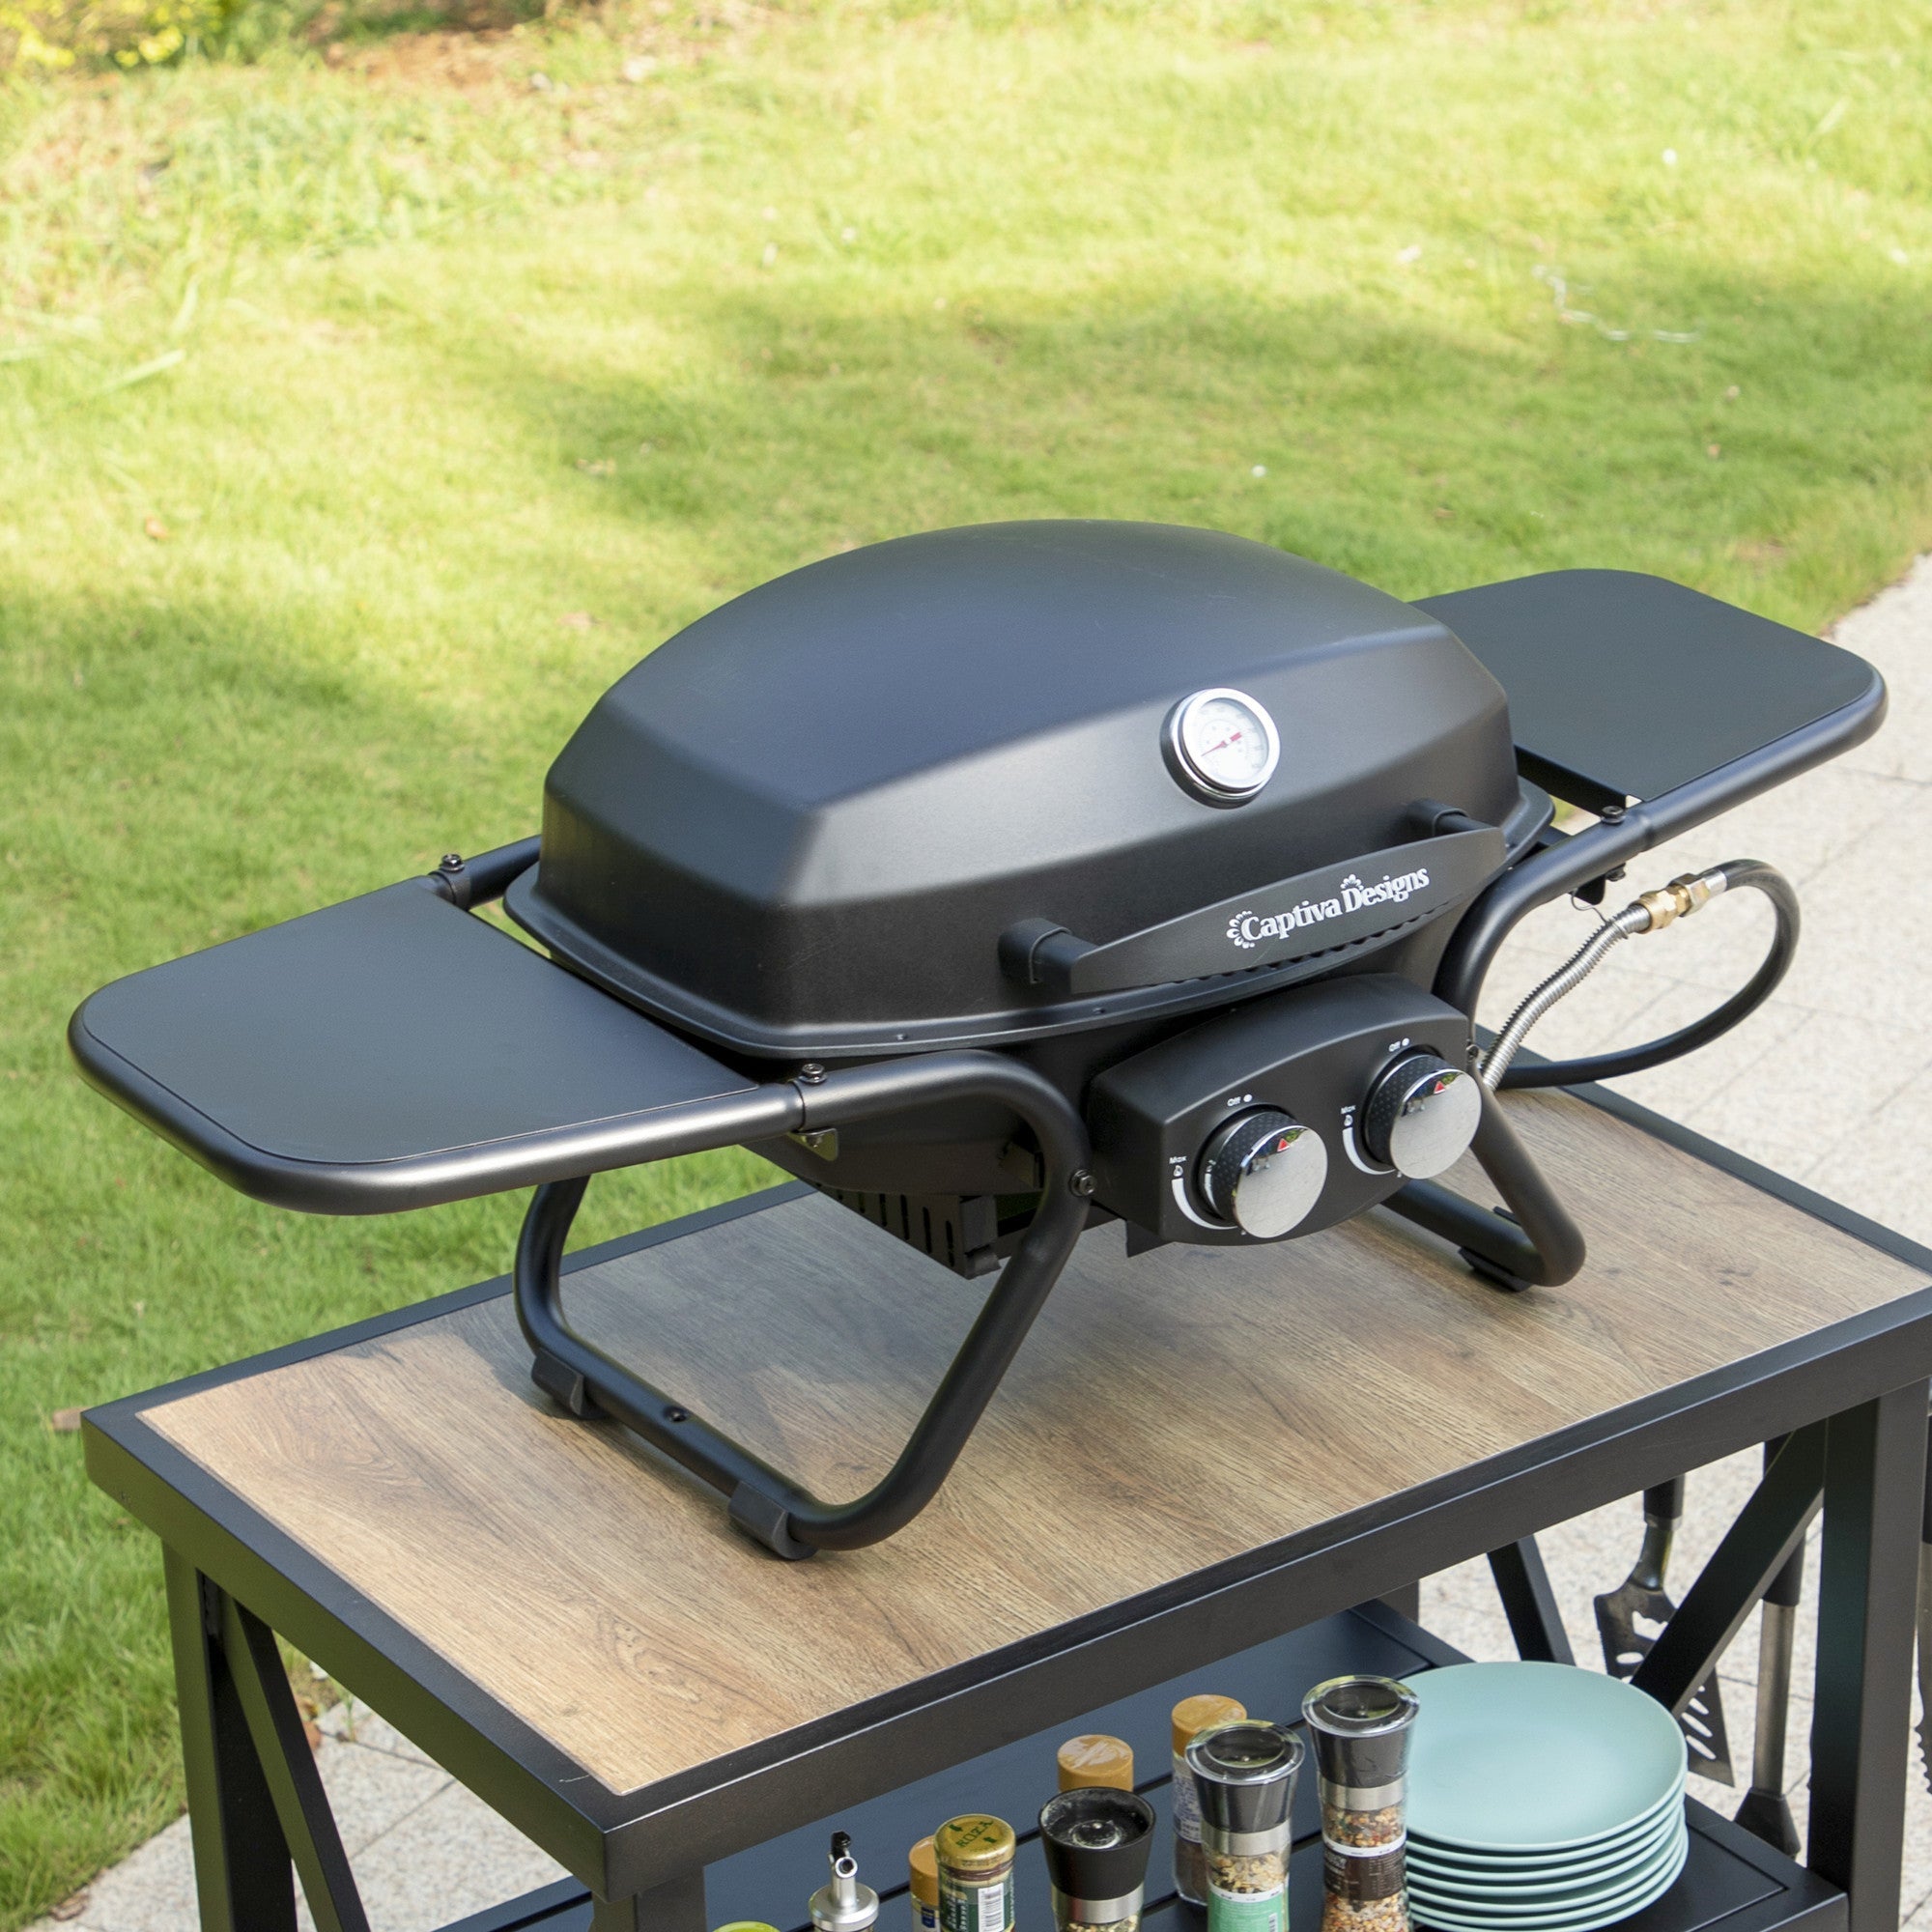 Williams-Sonoma - October 2016 Catalog - Philips Smoke-Less Infrared Grill  with BBQ & Steel-Wire Grids